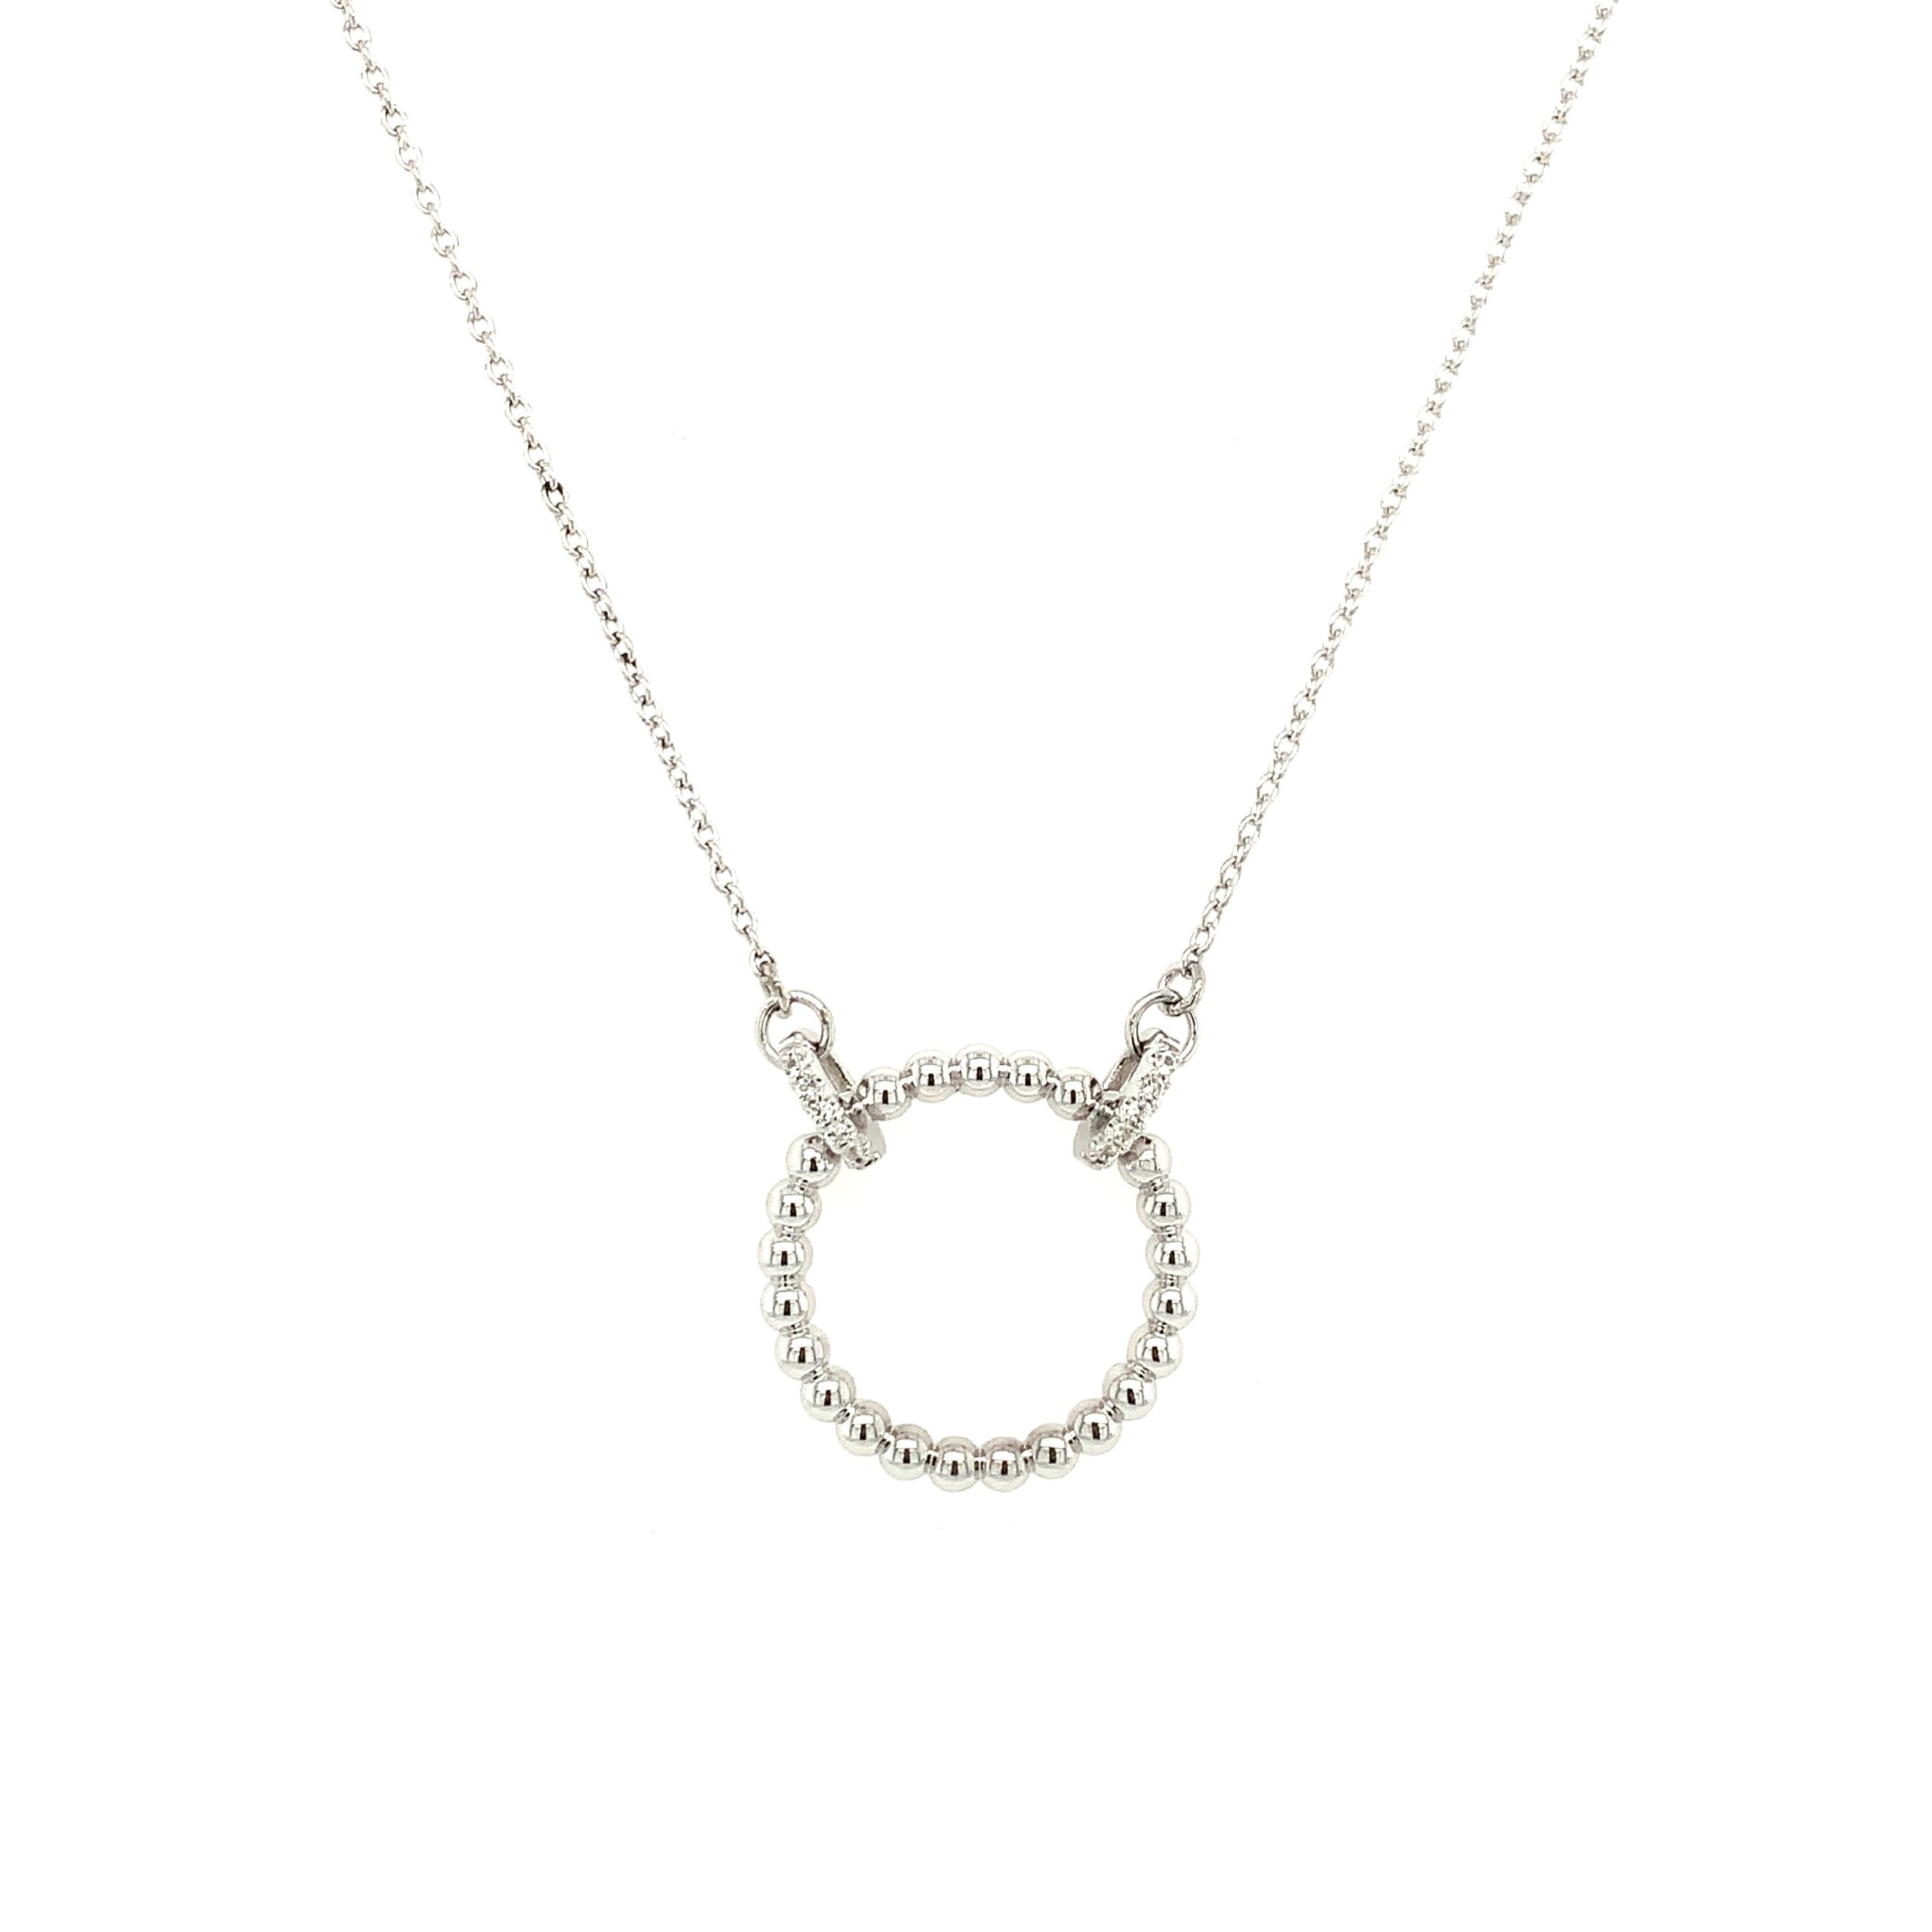 Sterling Silver White Sapphire Necklace